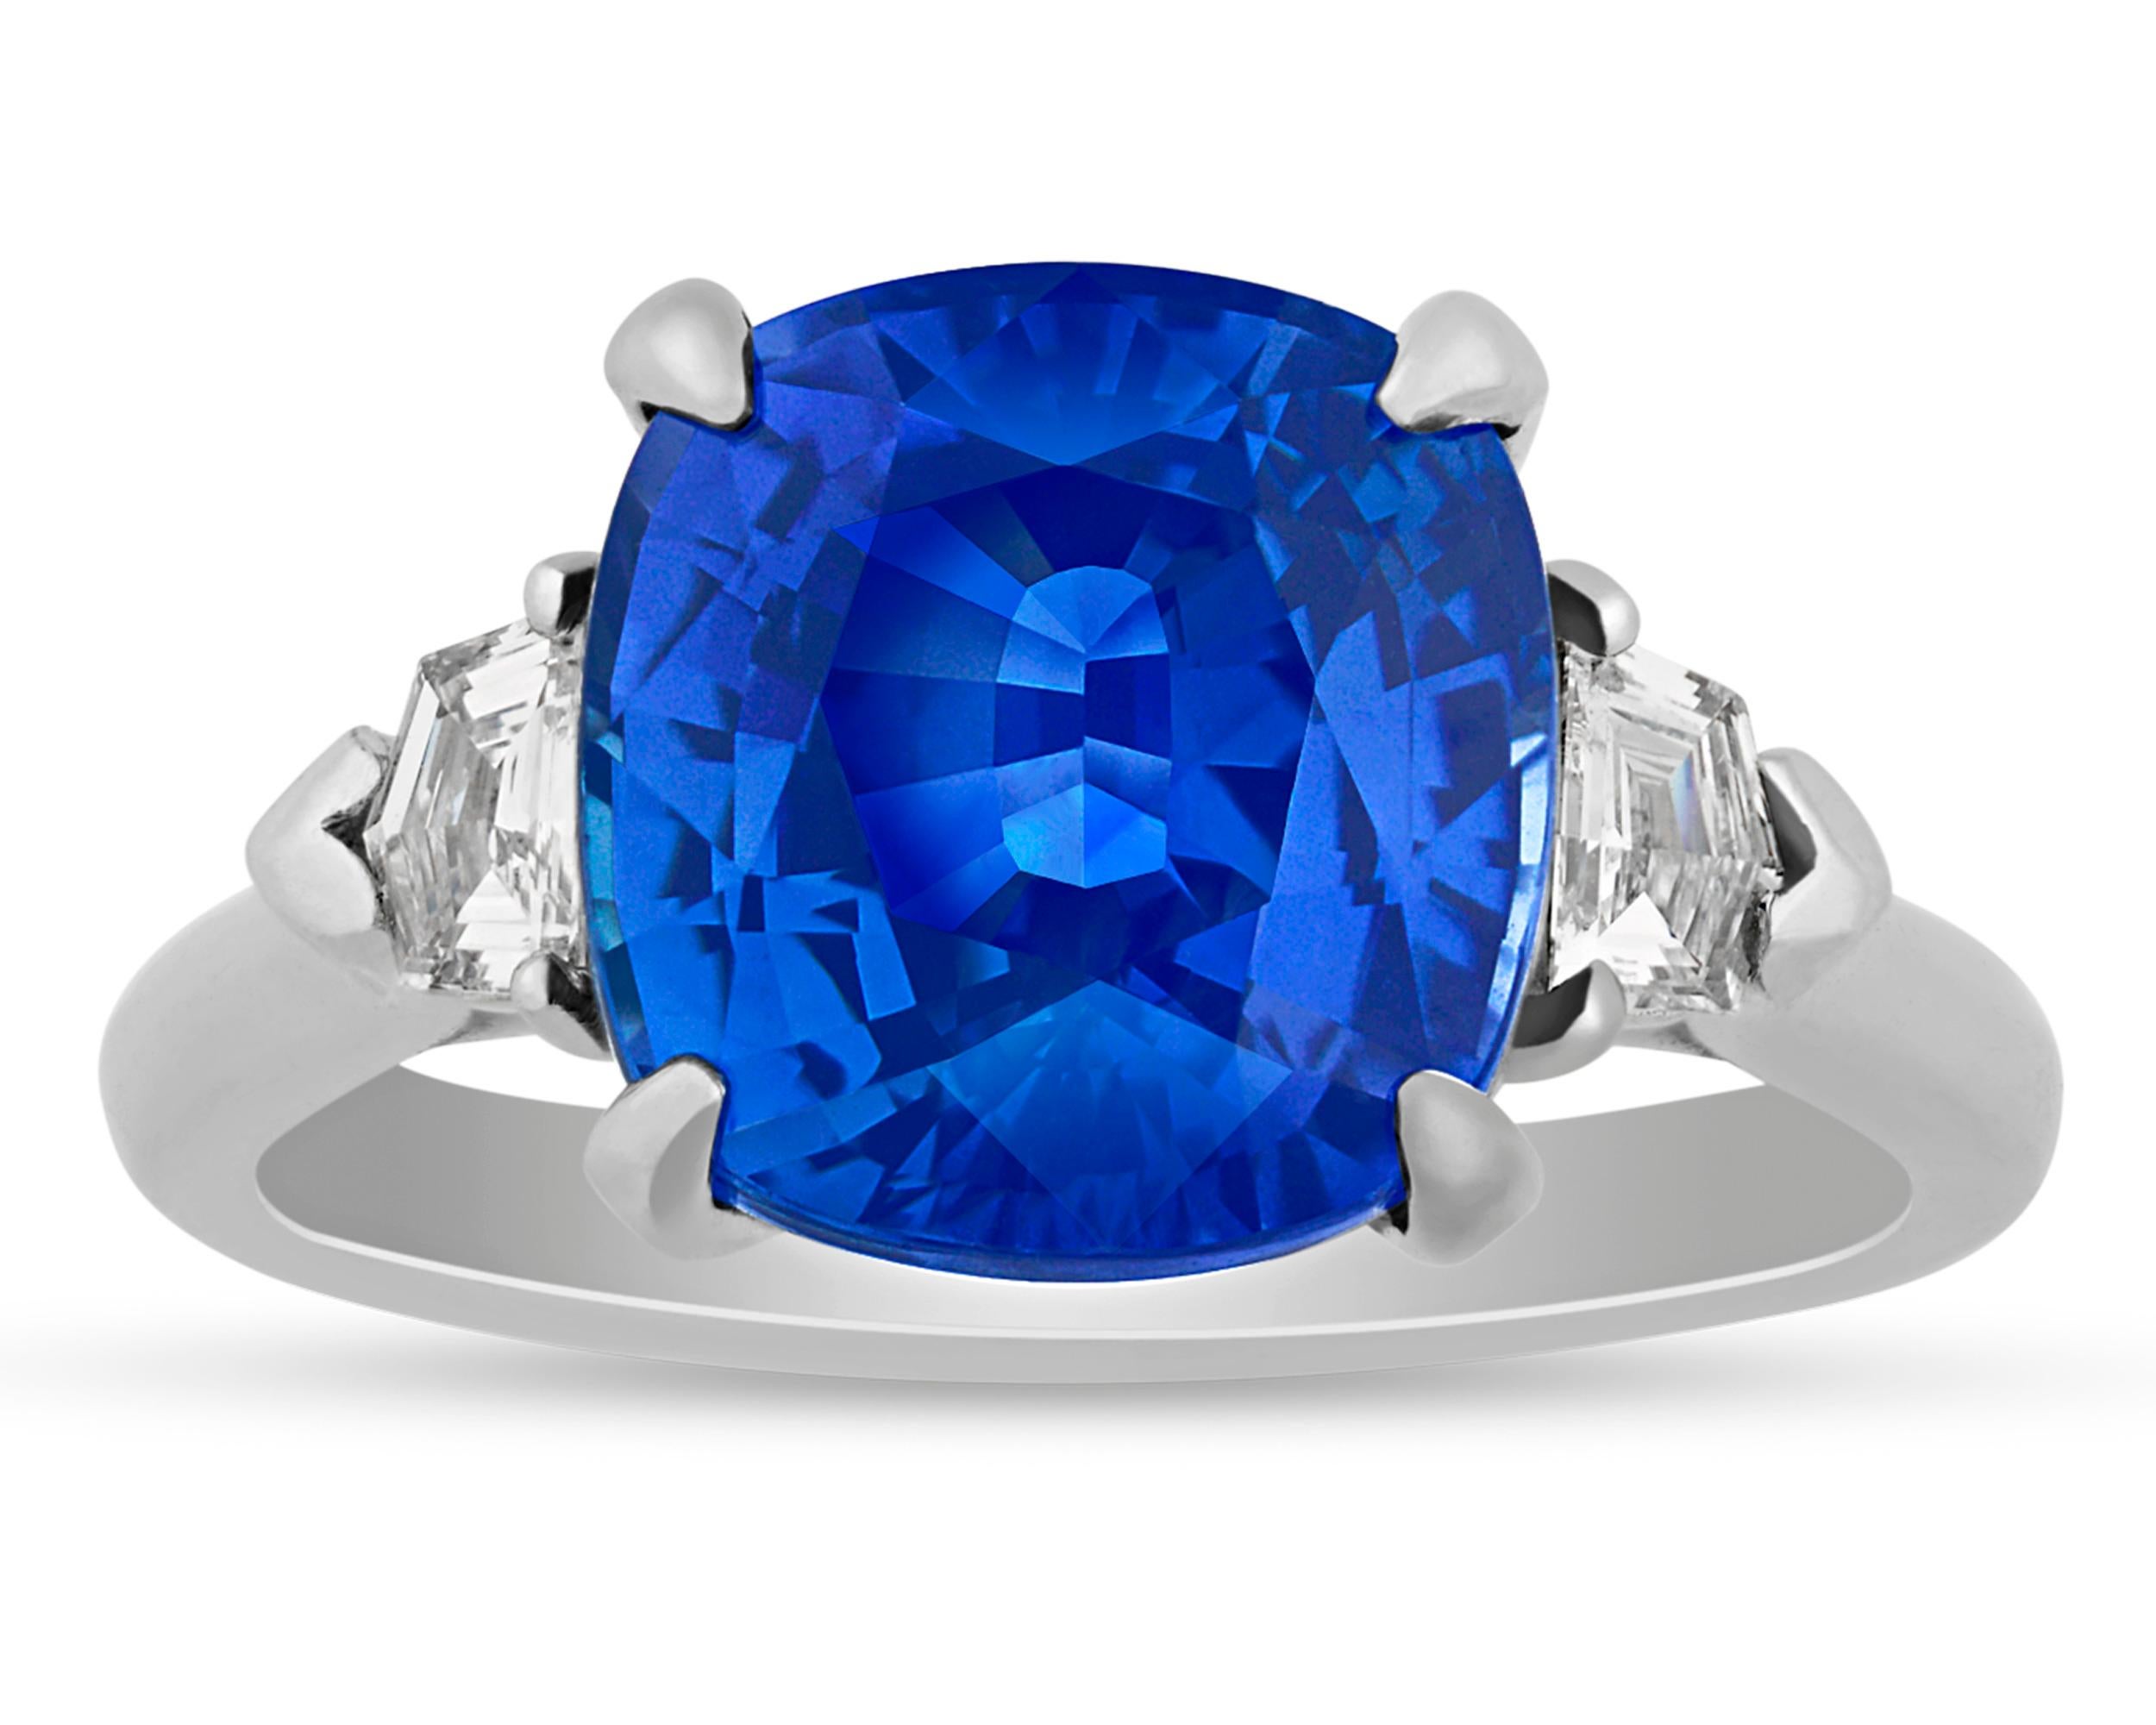 Ceylon sapphires are renowned for their pure, rich blue hue, and this example displays all of the best attributes of this coveted gemstone. Weighing 5.74 carats, the sapphire is flanked by diamonds totaling 0.74 carat in its platinum setting. GIA